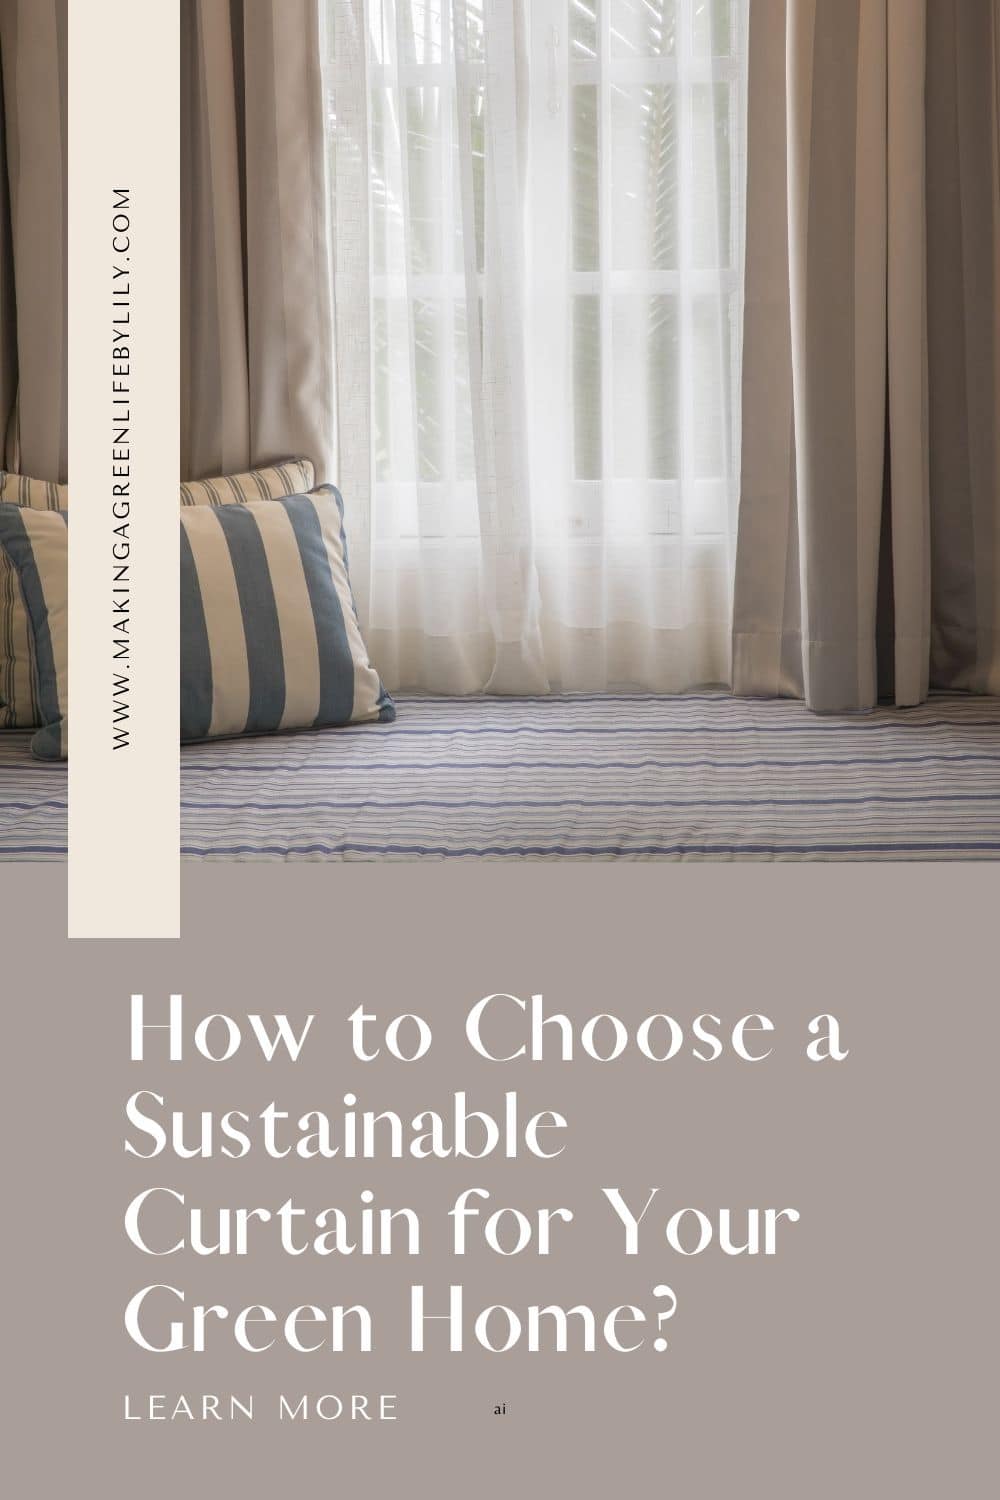 How to Choose a Sustainable Curtain for Your Green Home?